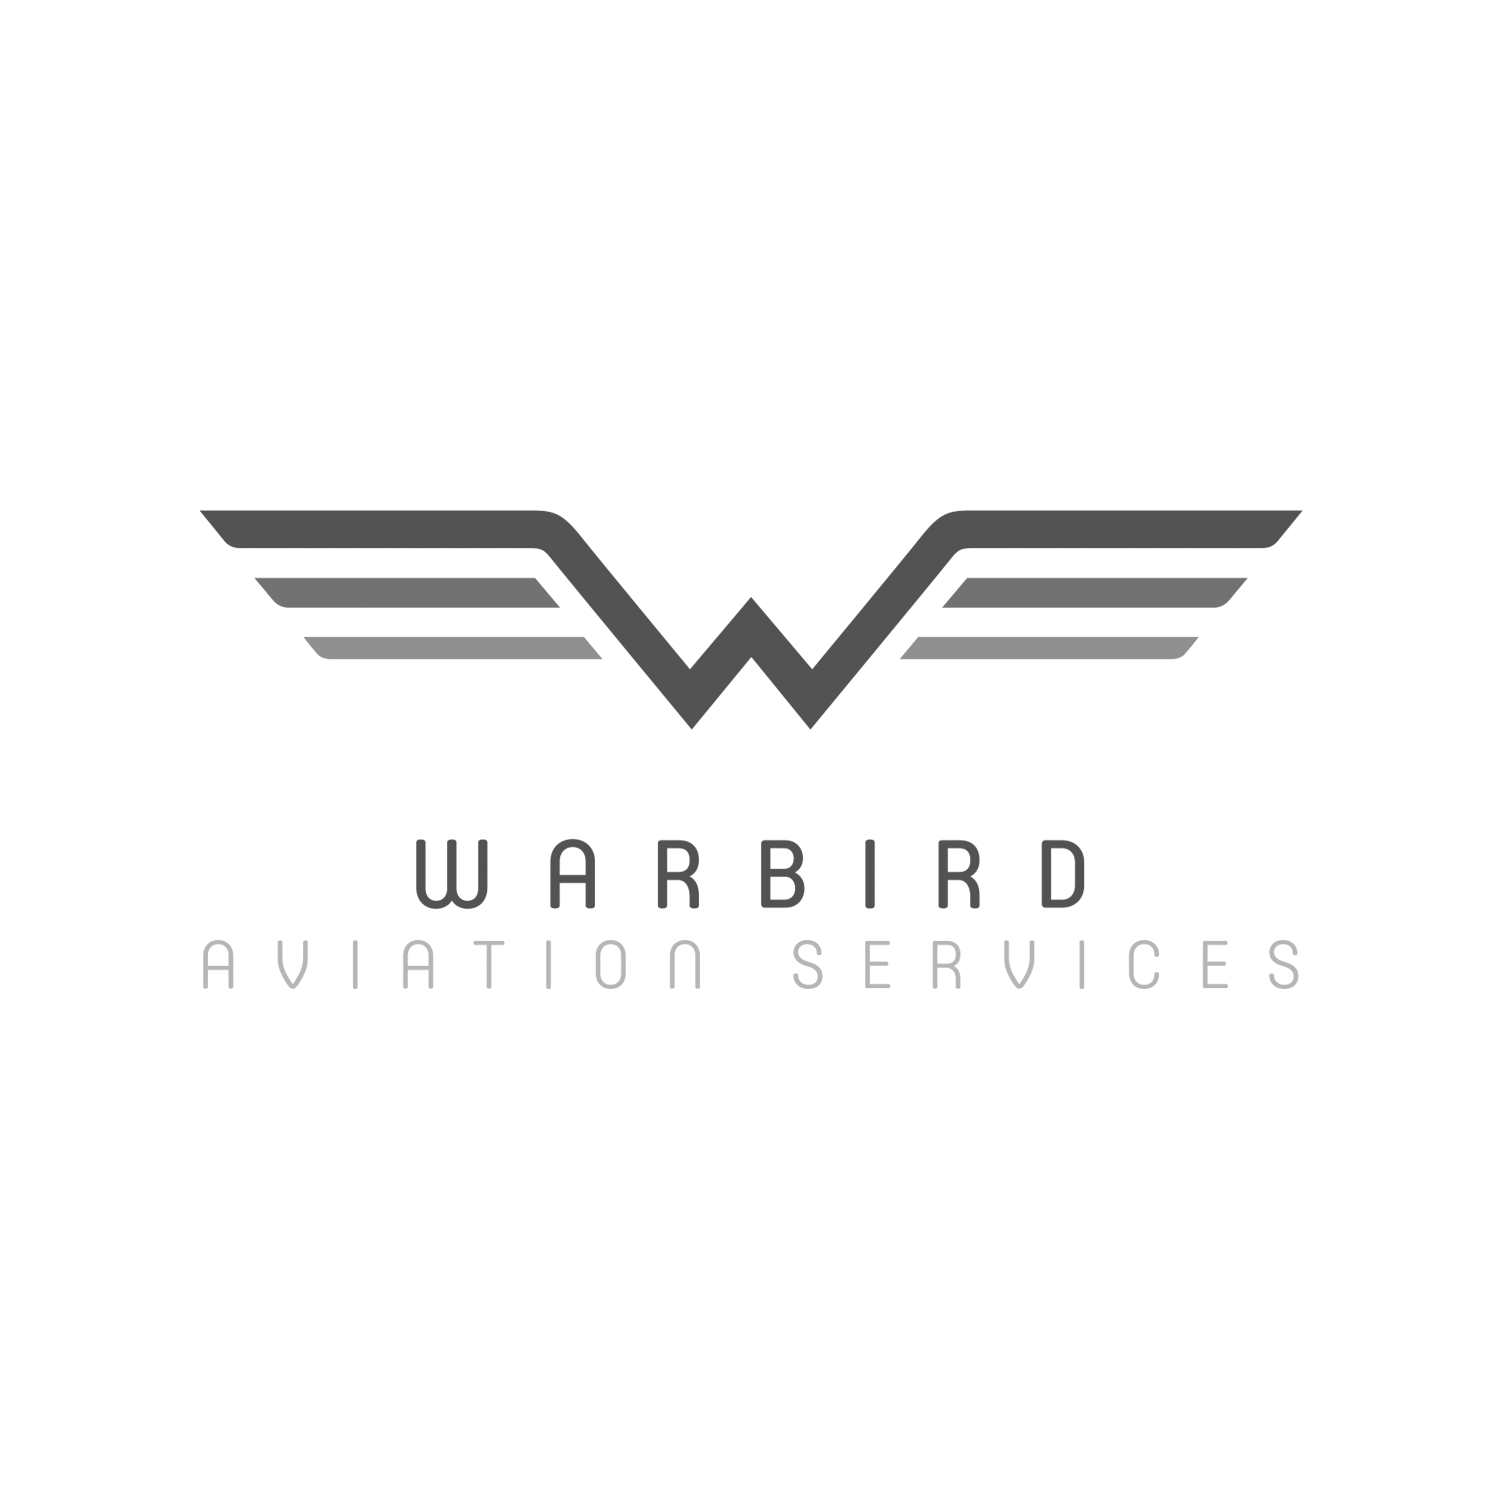 Parts Logo - Logo design for aviation services company, who build WWII aeroplane ...